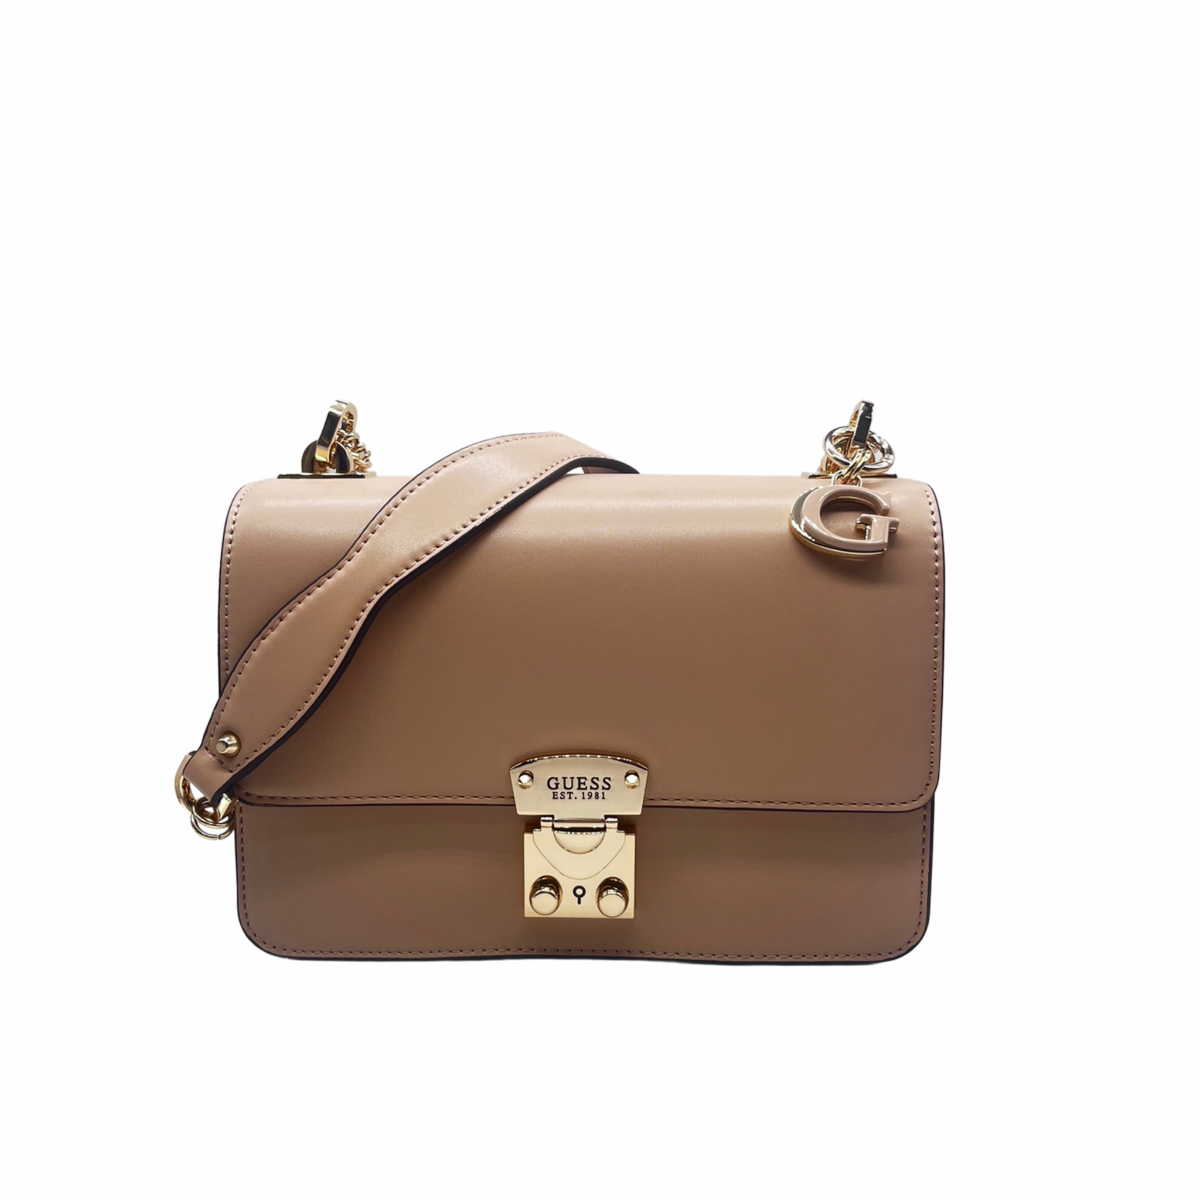 Guess Light Beige Crossbody Bag with Chain Detail